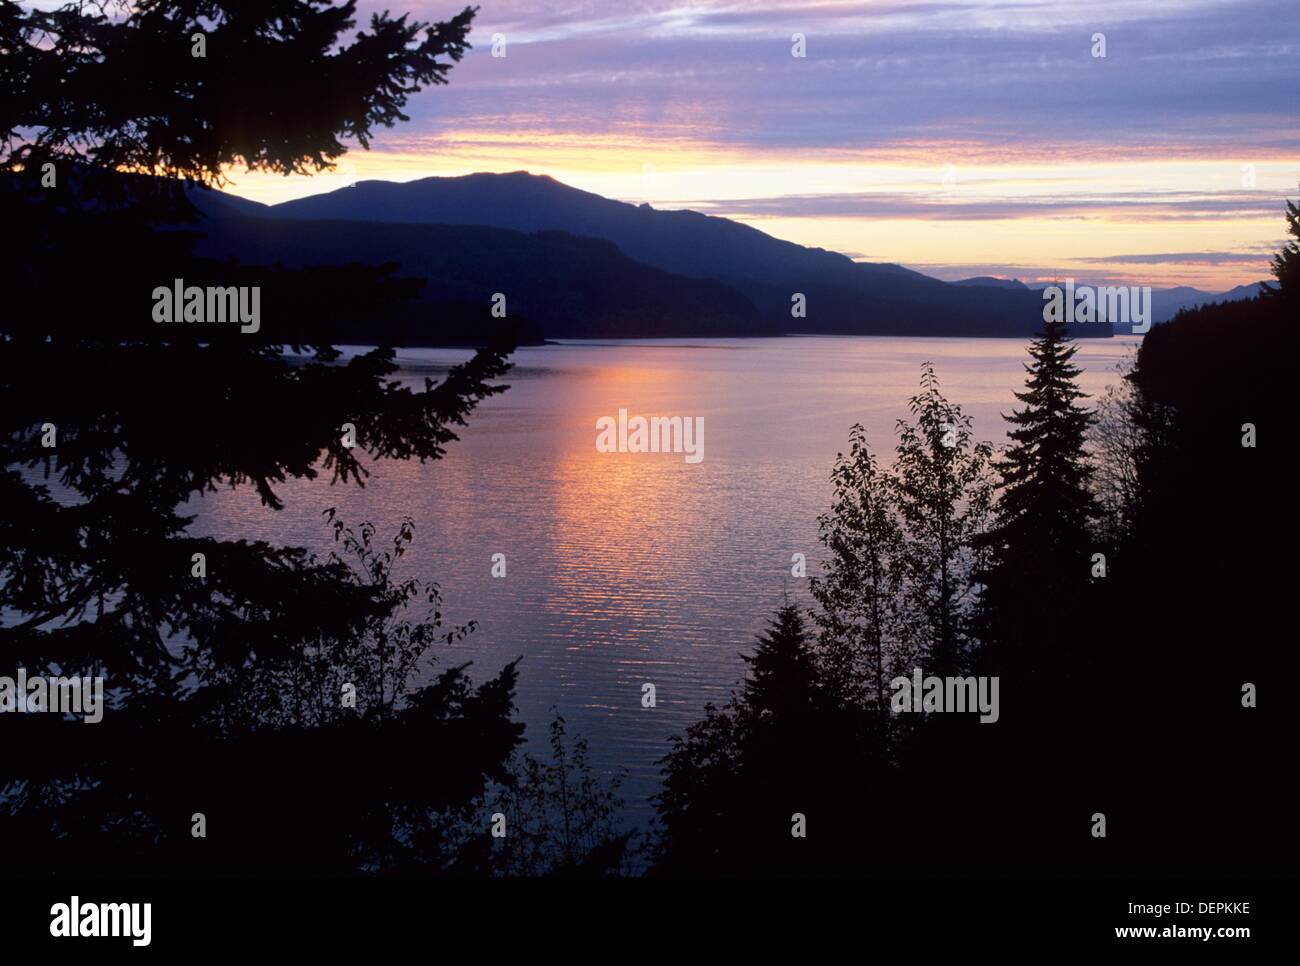 Skamania County High Resolution Stock Photography and